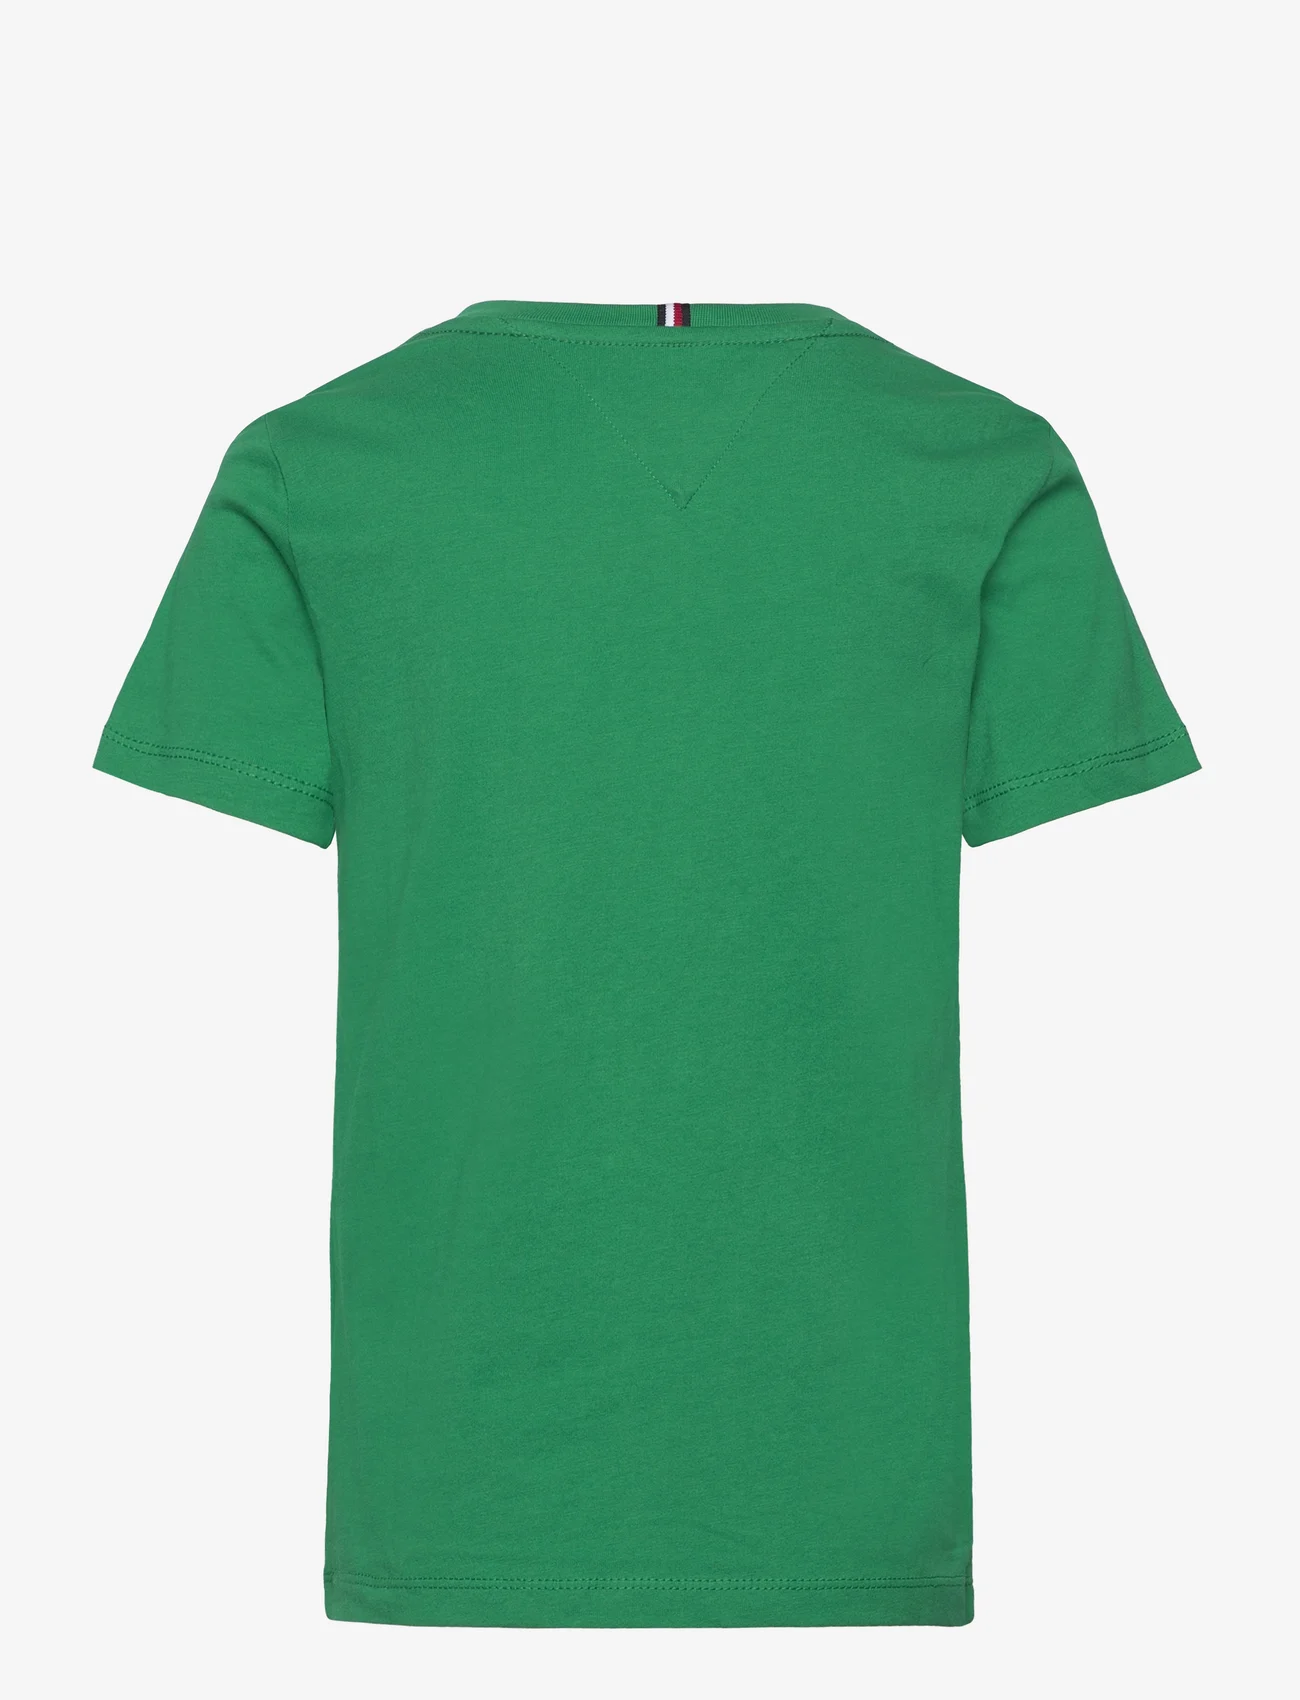 Tommy Hilfiger - U ESSENTIAL TEE S/S - lyhythihaiset t-paidat - olympic green - 1